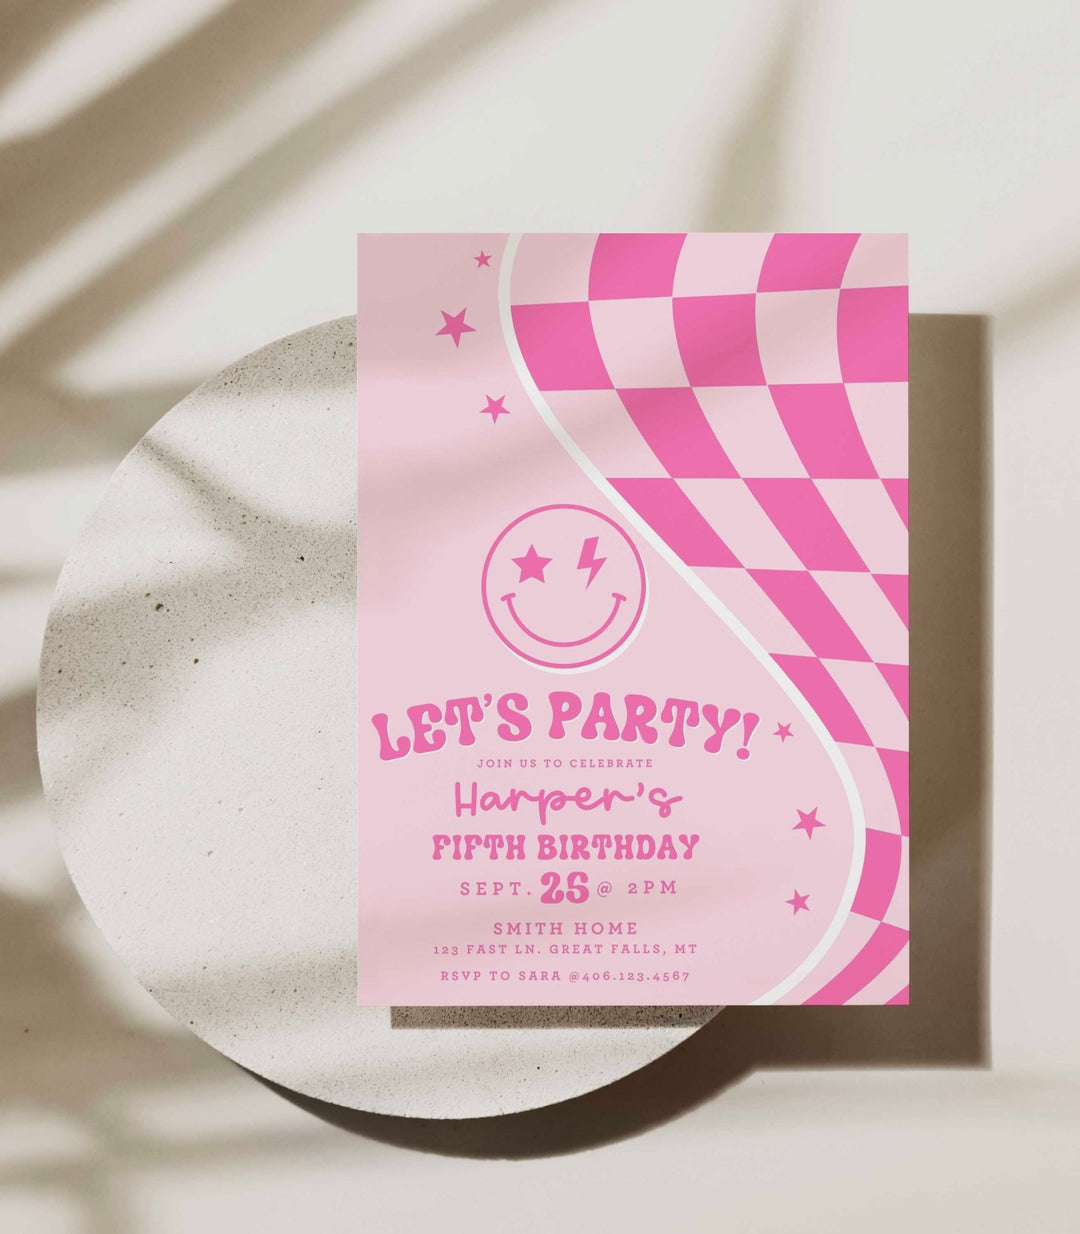 Let's Party Pink Smiley Birthday Invitation - Any Age - High Peaks Studios